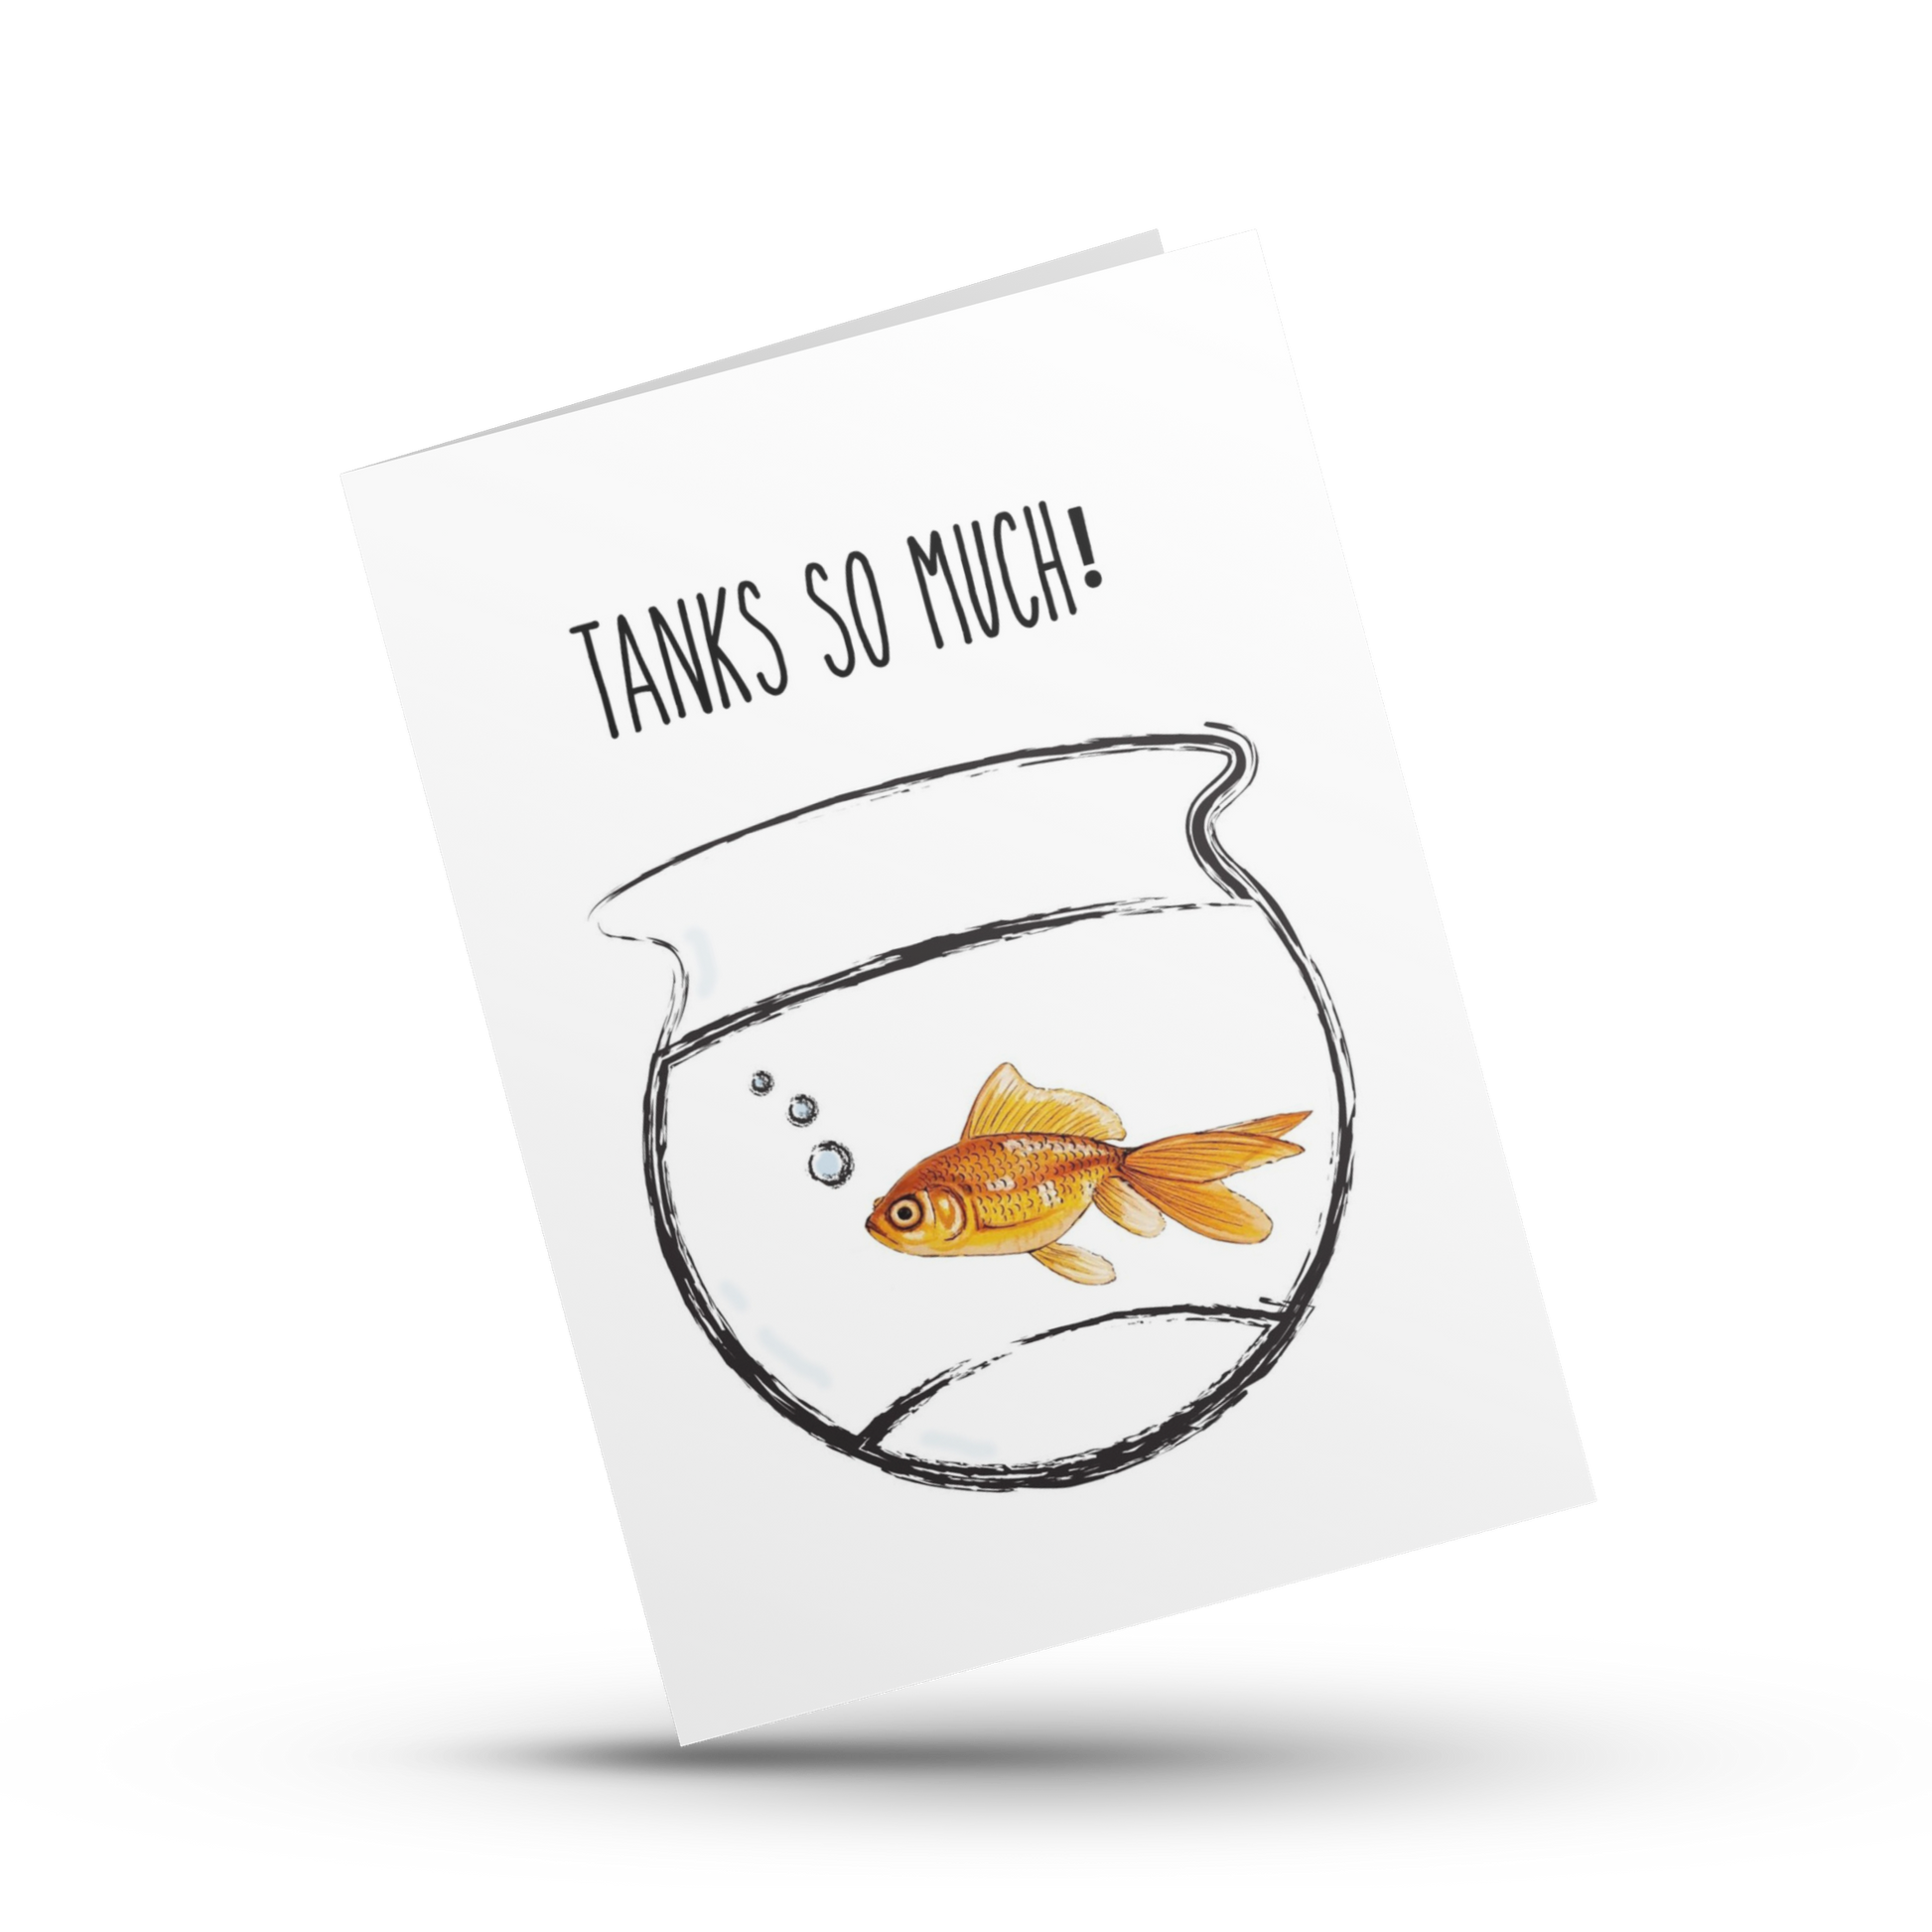 Thank you card, Tanks so much, Fish pun thank you card, Funny